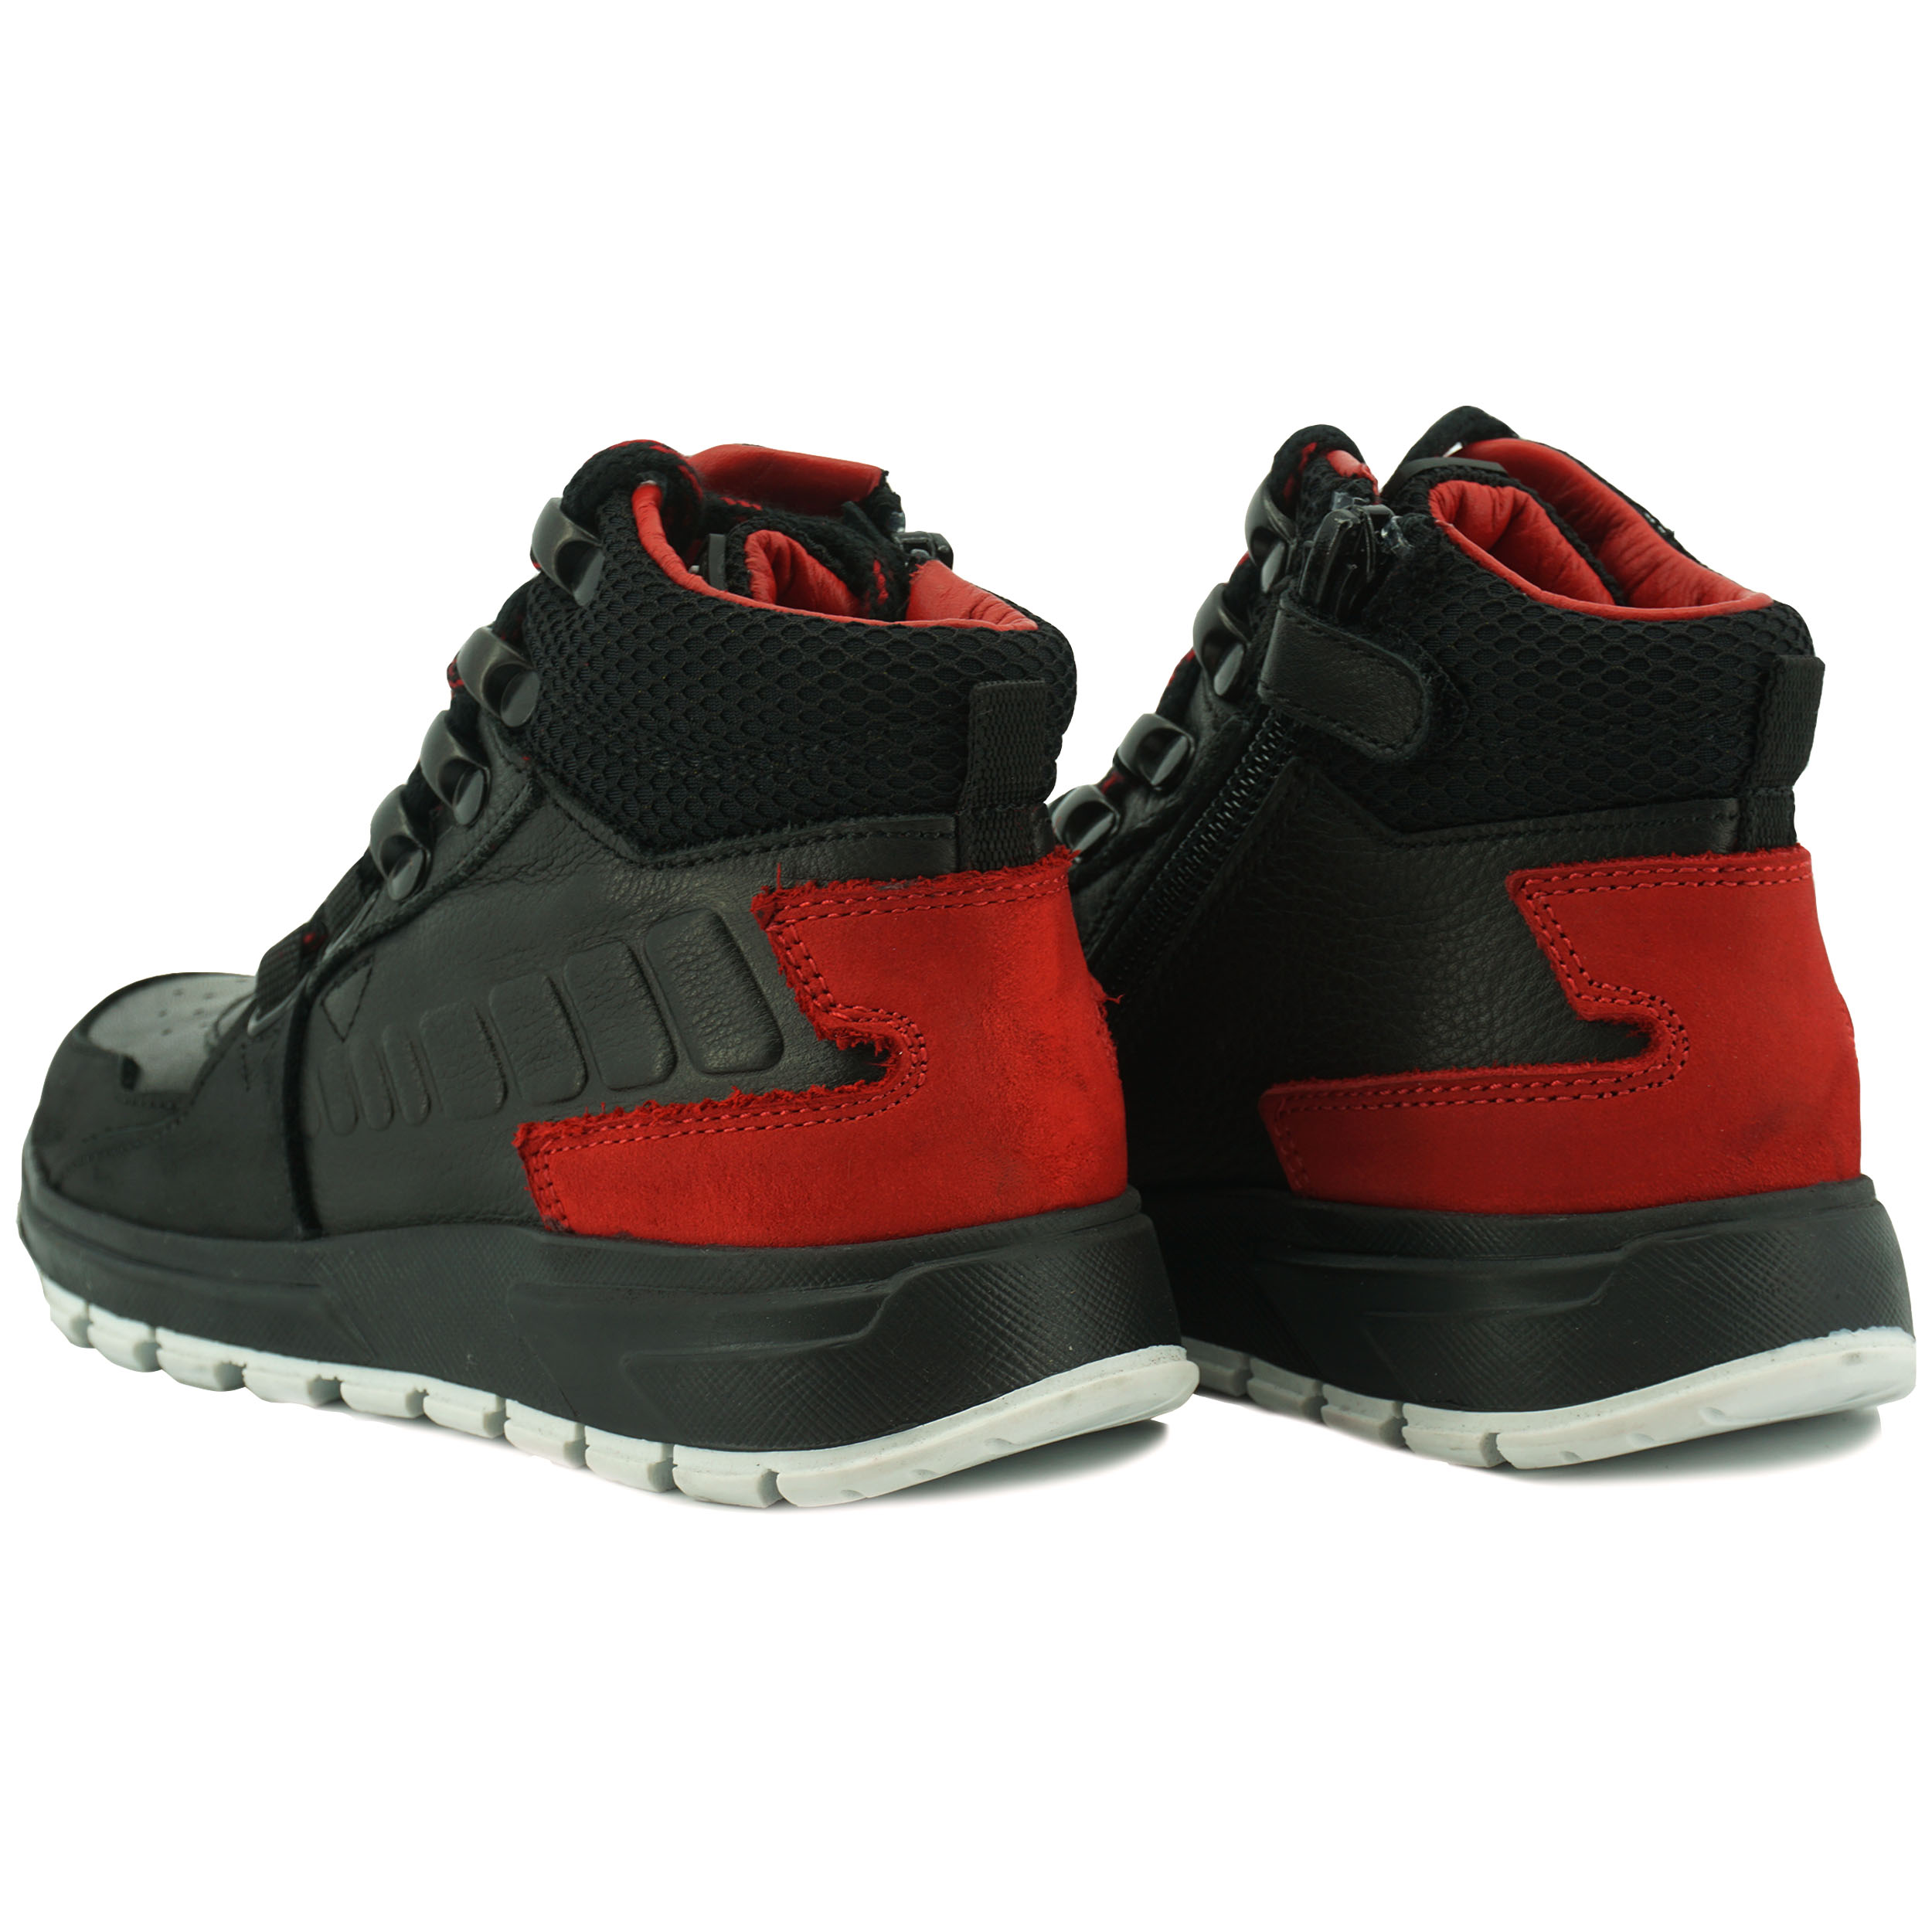 Trackstyle Boot 321868 Black/Red 3,5